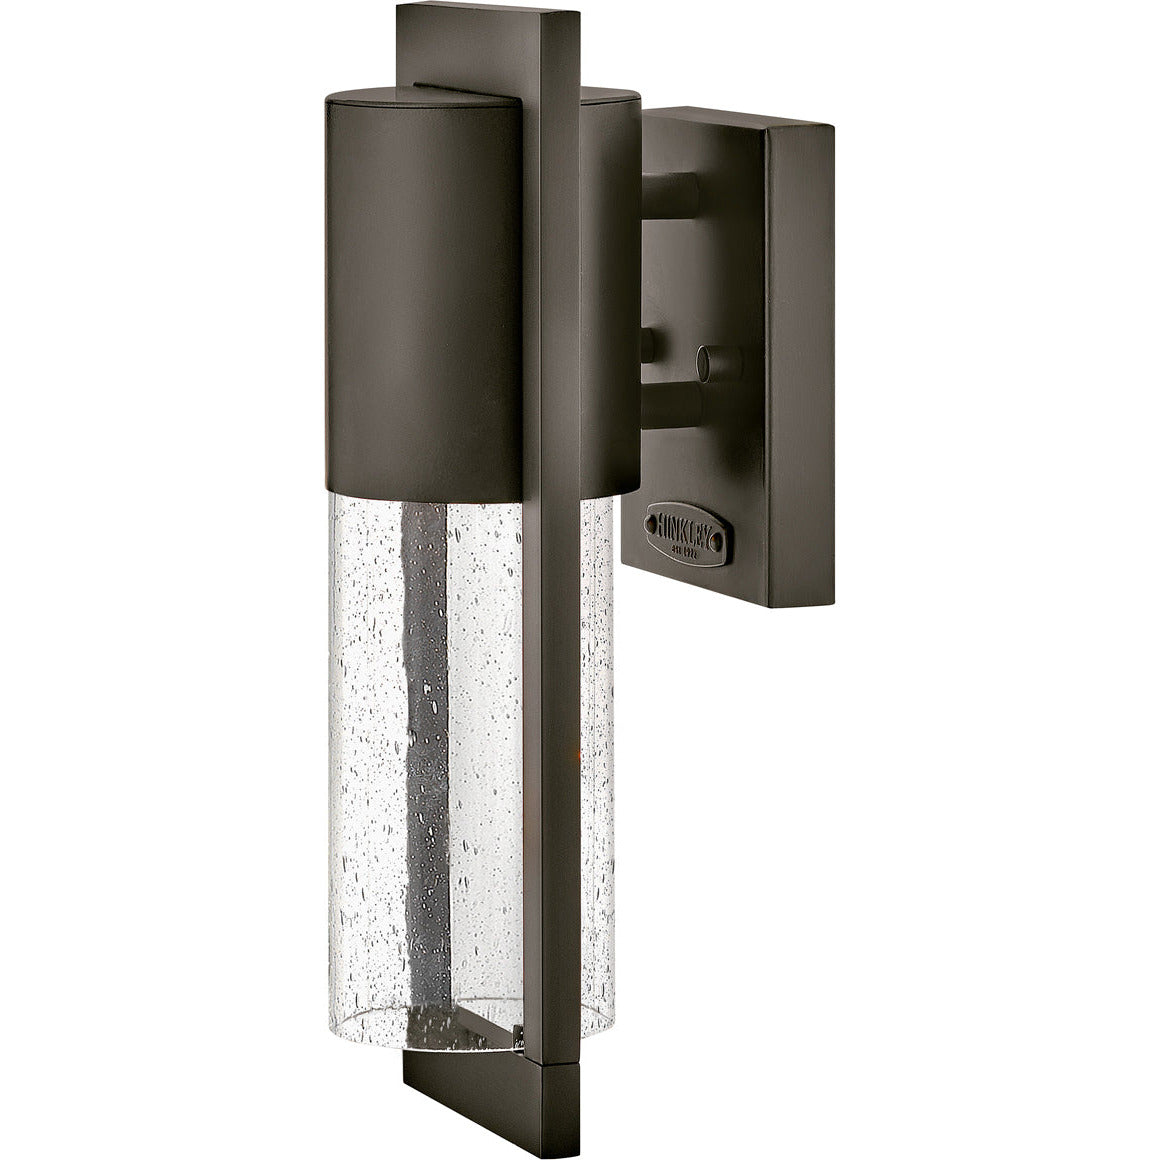 Shelter Extra Small Wall Mount Lantern